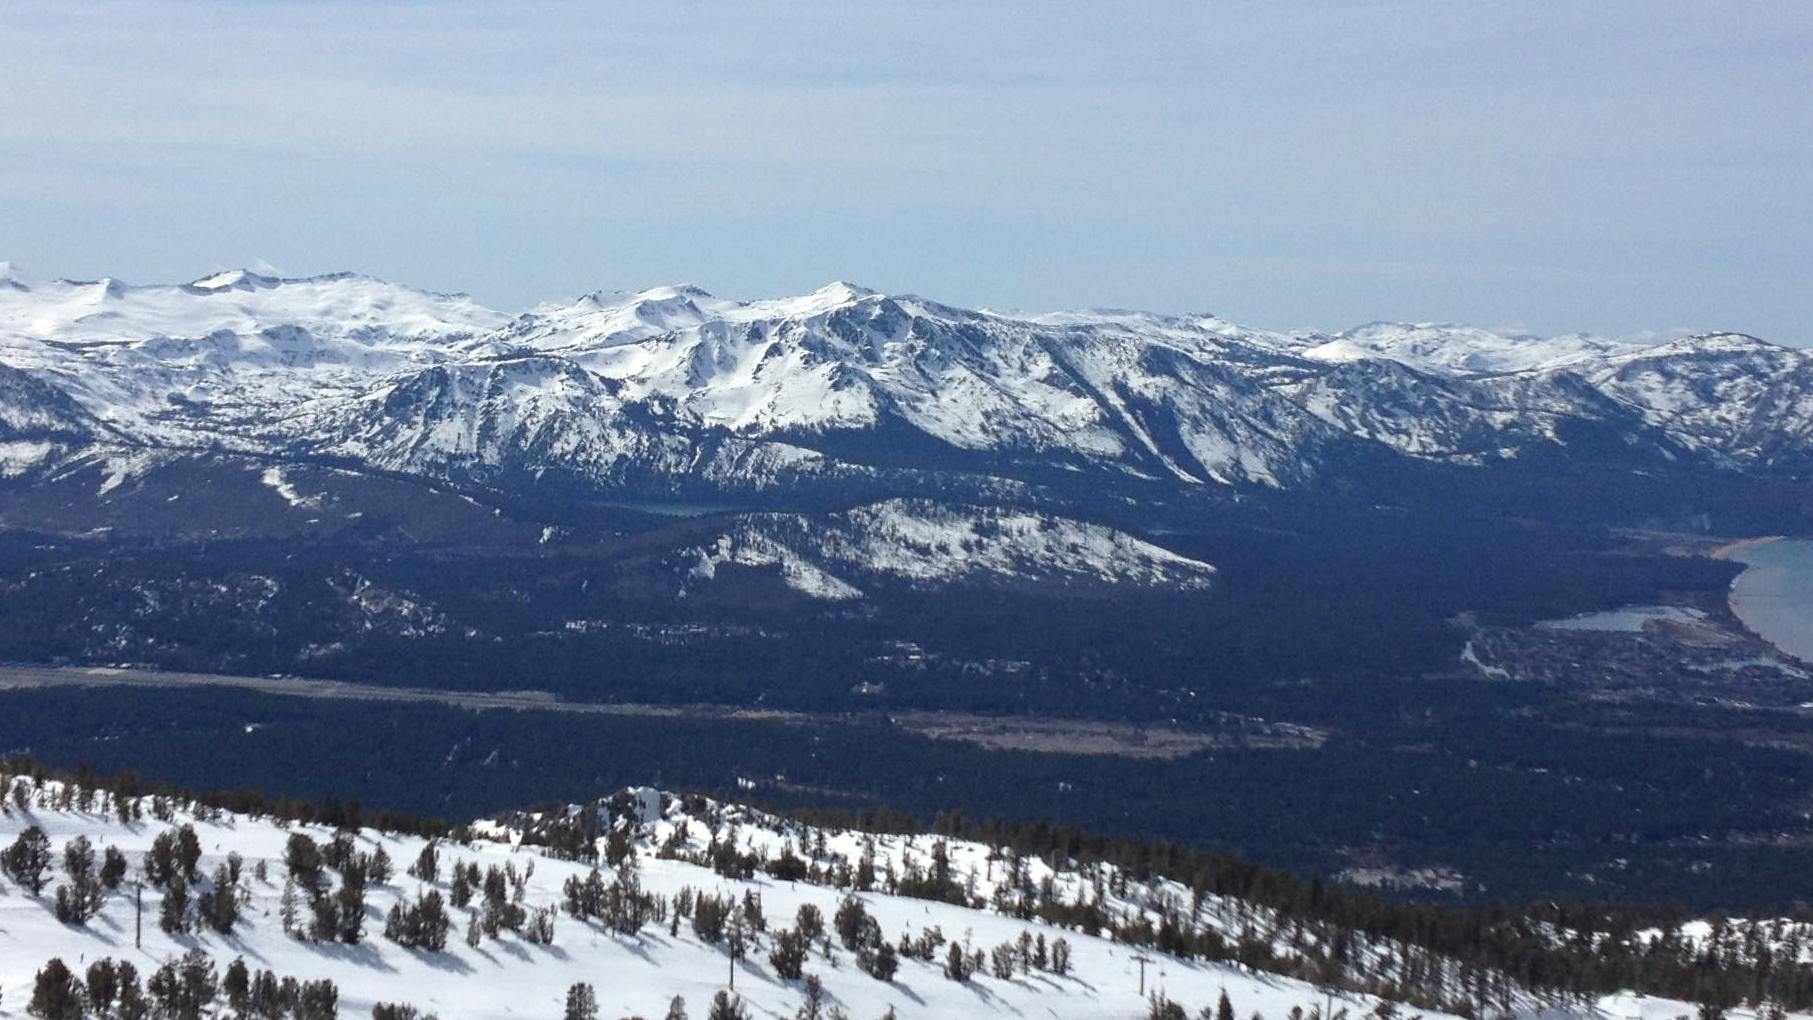 View of Lake Tahoe with snowy ski areas and mountain peaks surrounding it. 